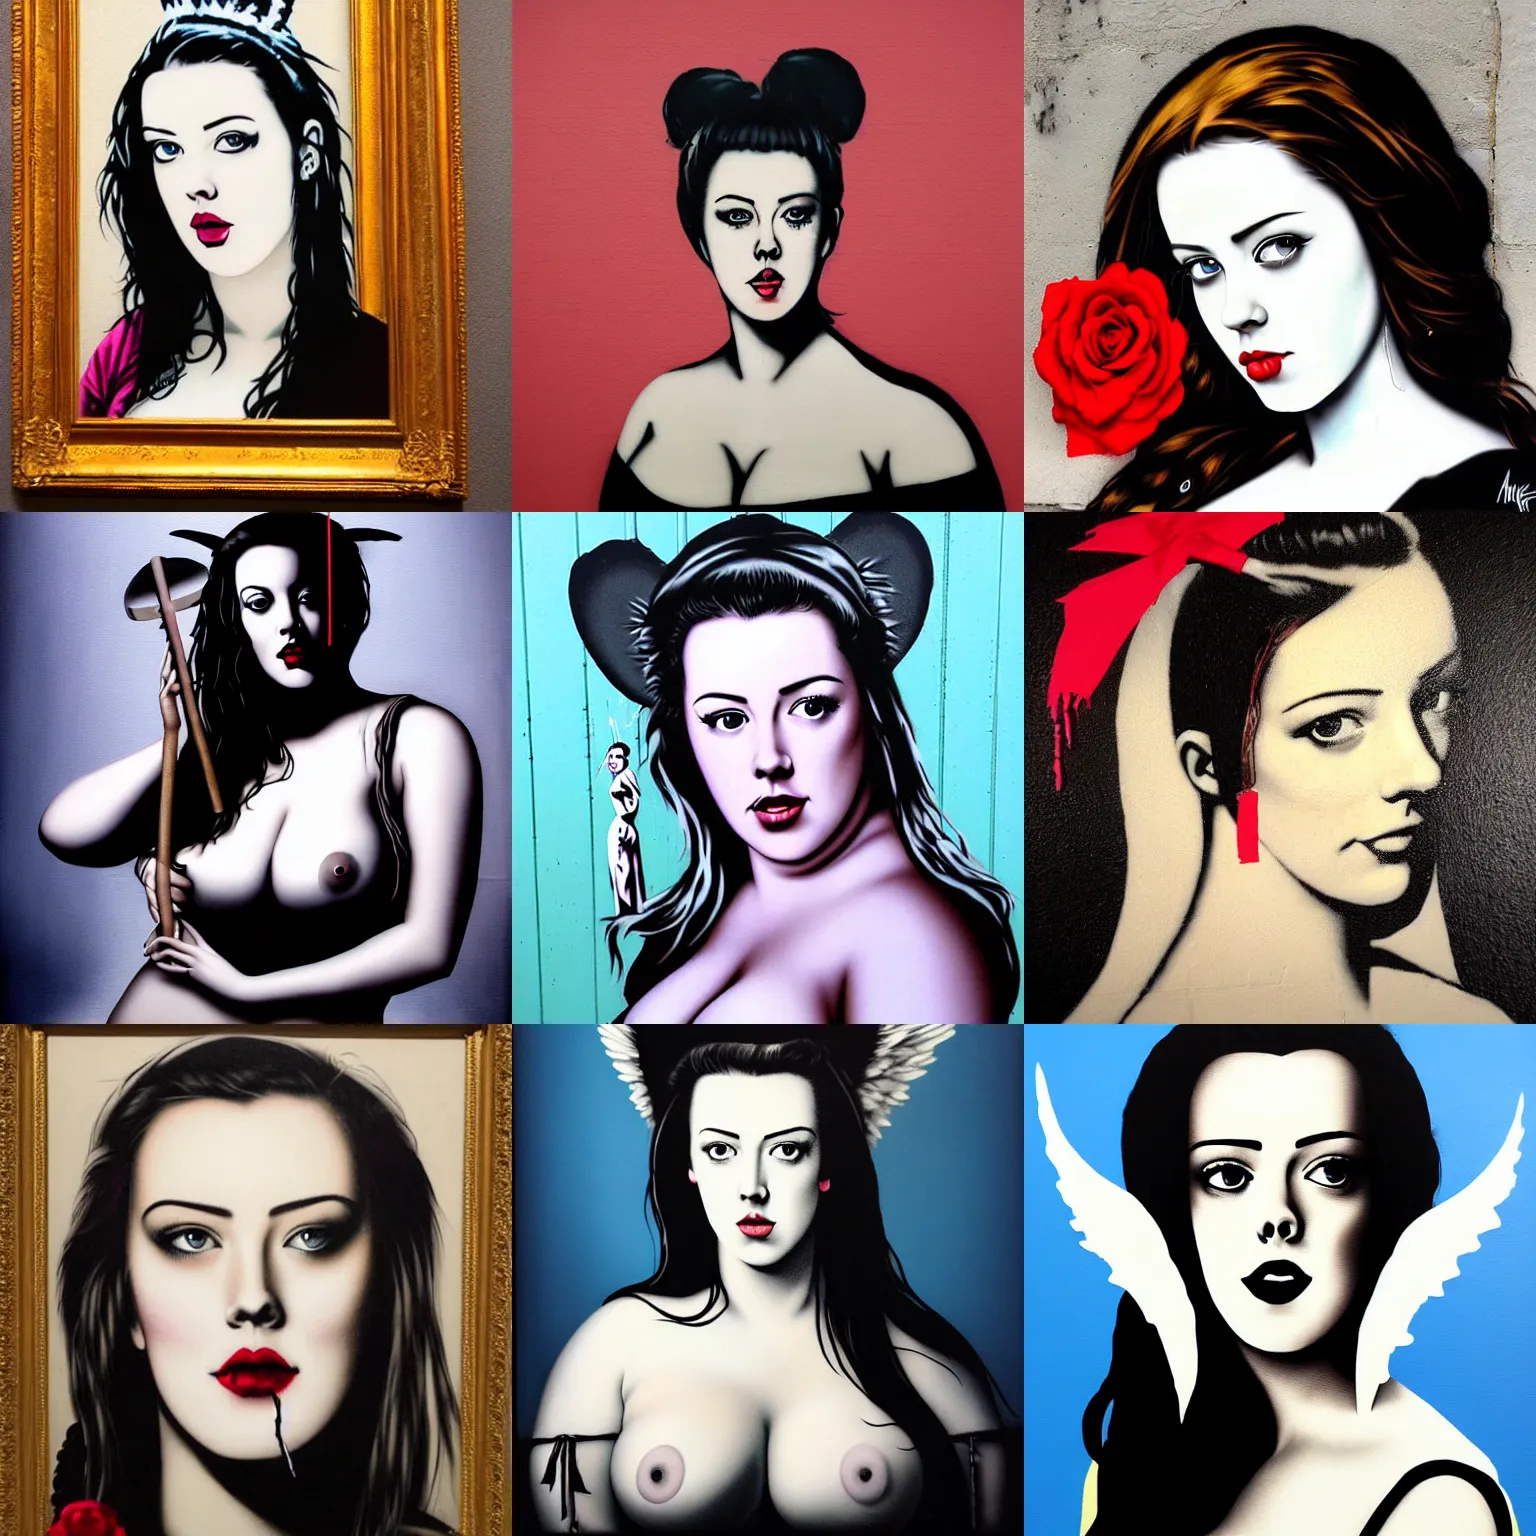 Prompt: portrait of angelawhite, by banksy